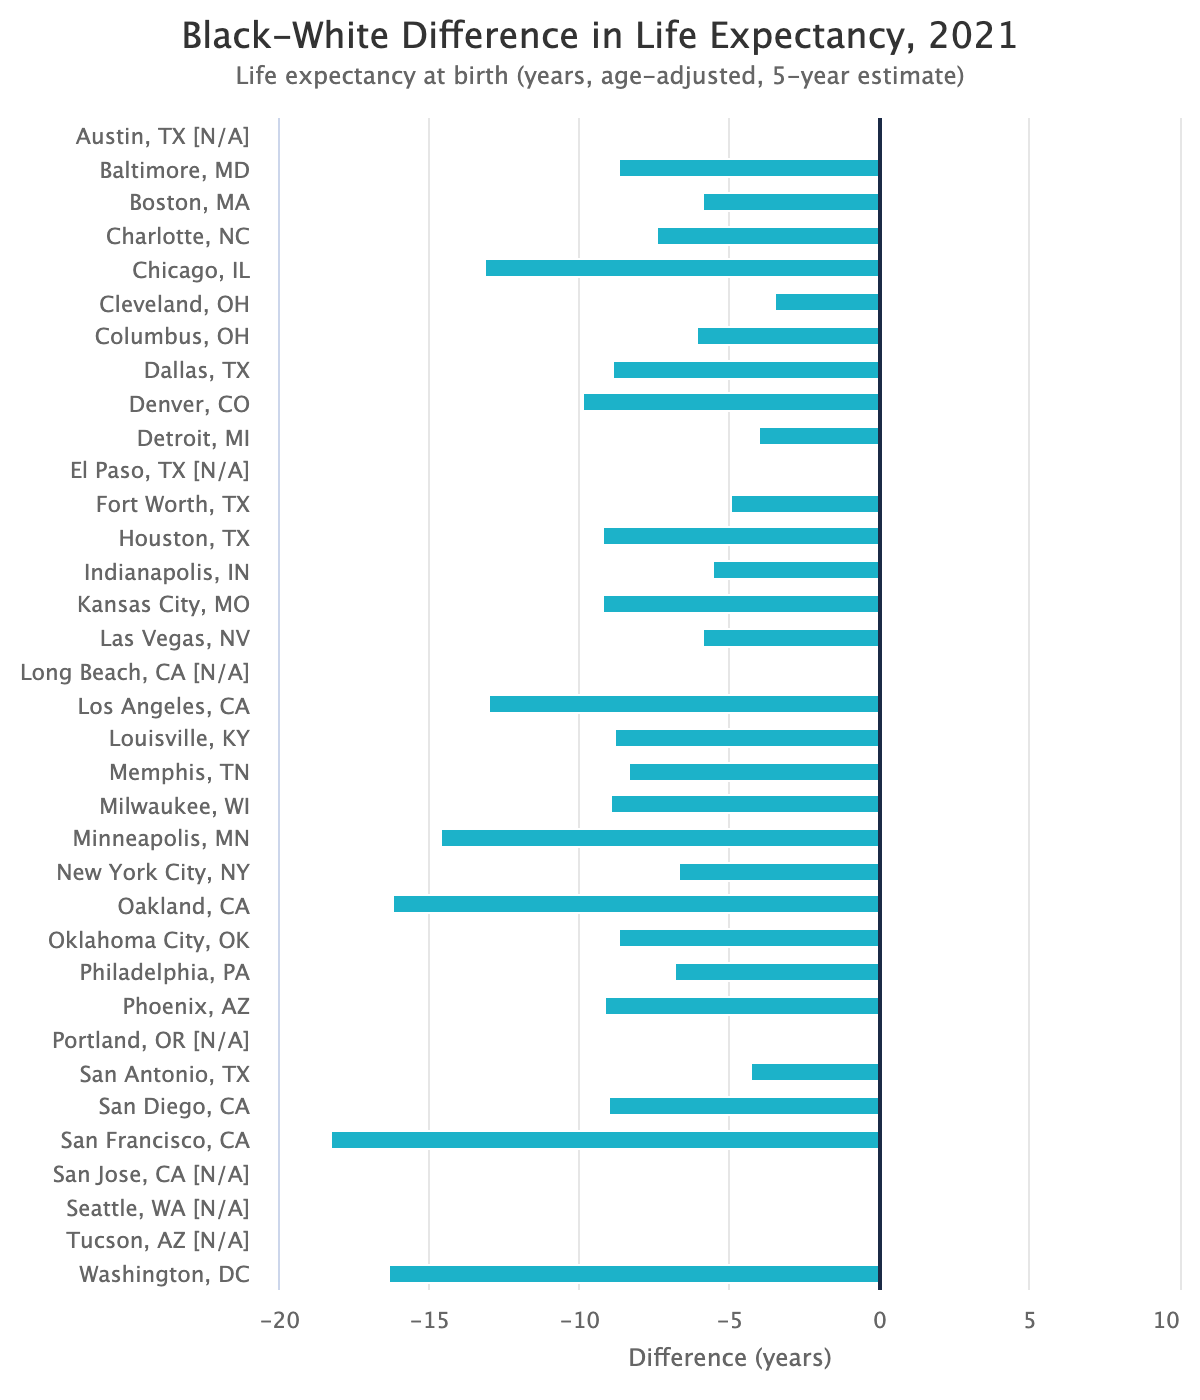 Chart showing Black-white difference in life expectancy in 35 cities in 2021. Most cities show a significant difference, with Black life expectancy rates being lower.